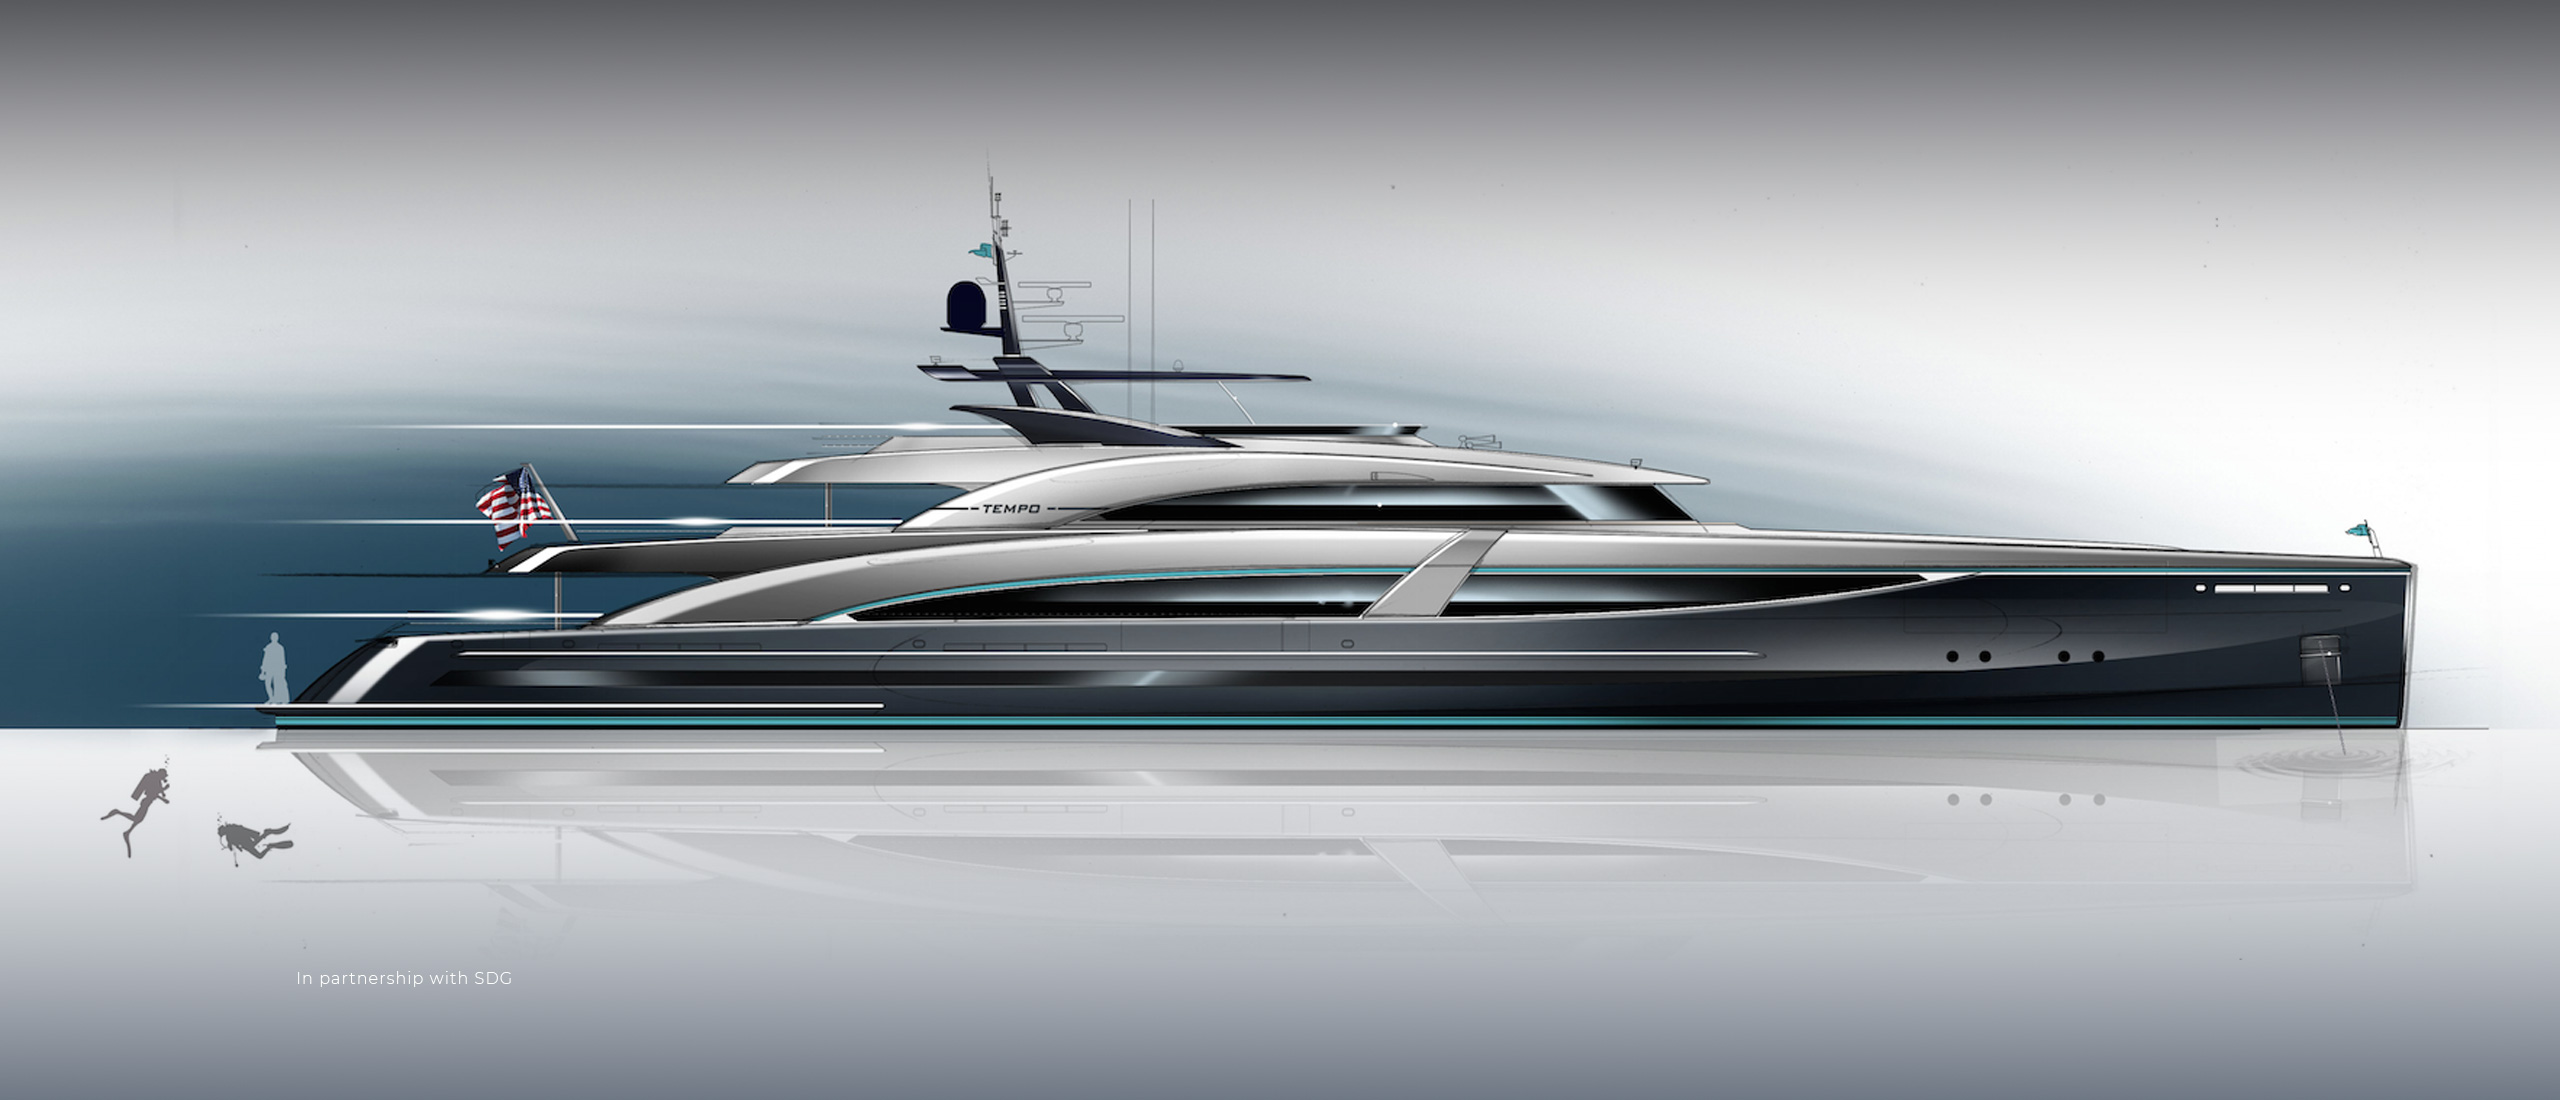 DLBA 58m super yacht concept with artificial intelligence